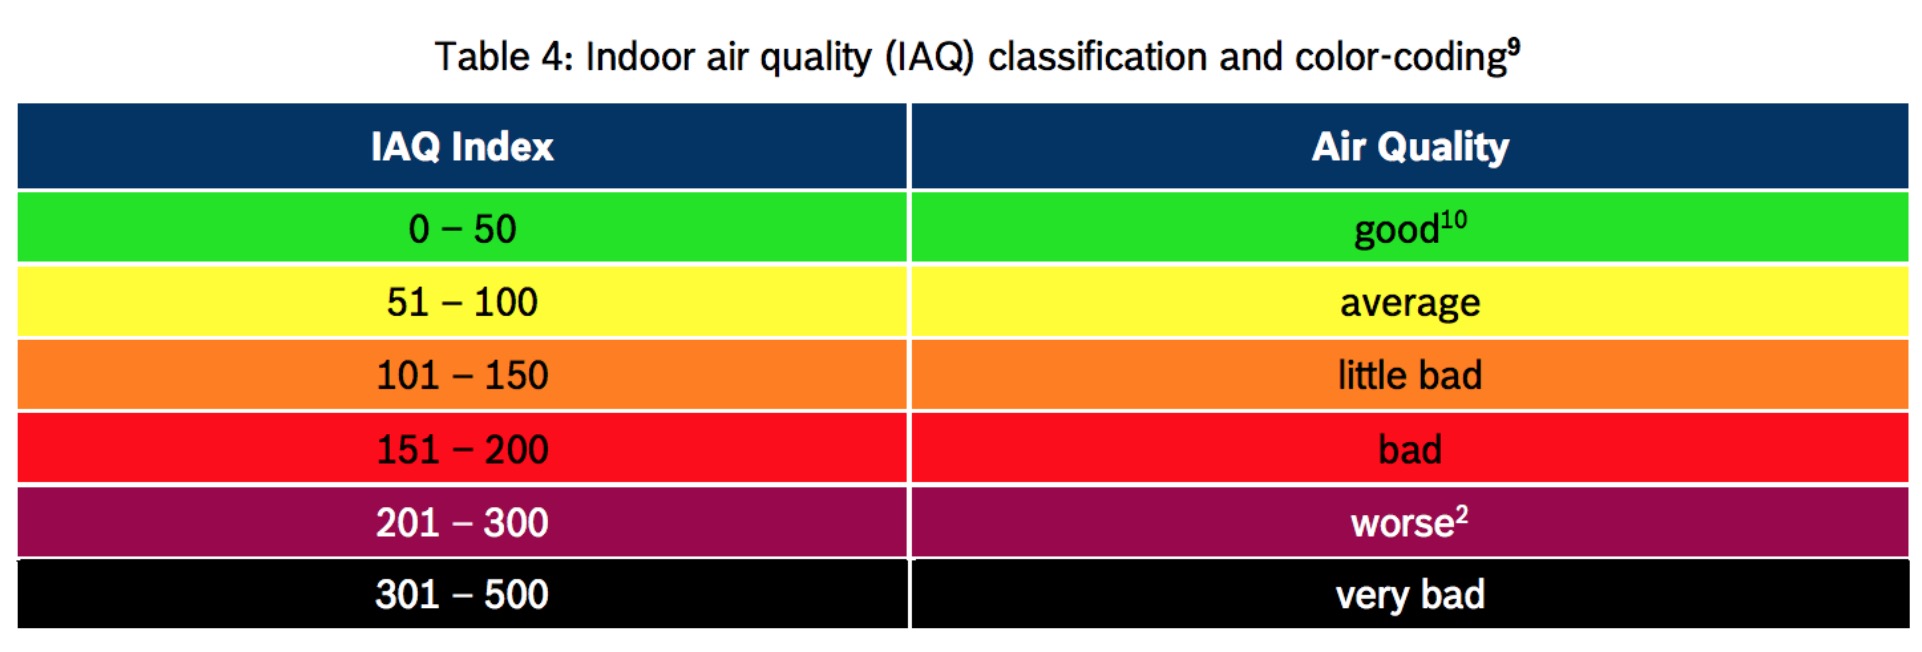 Indoor_air_quality_classification.JPG